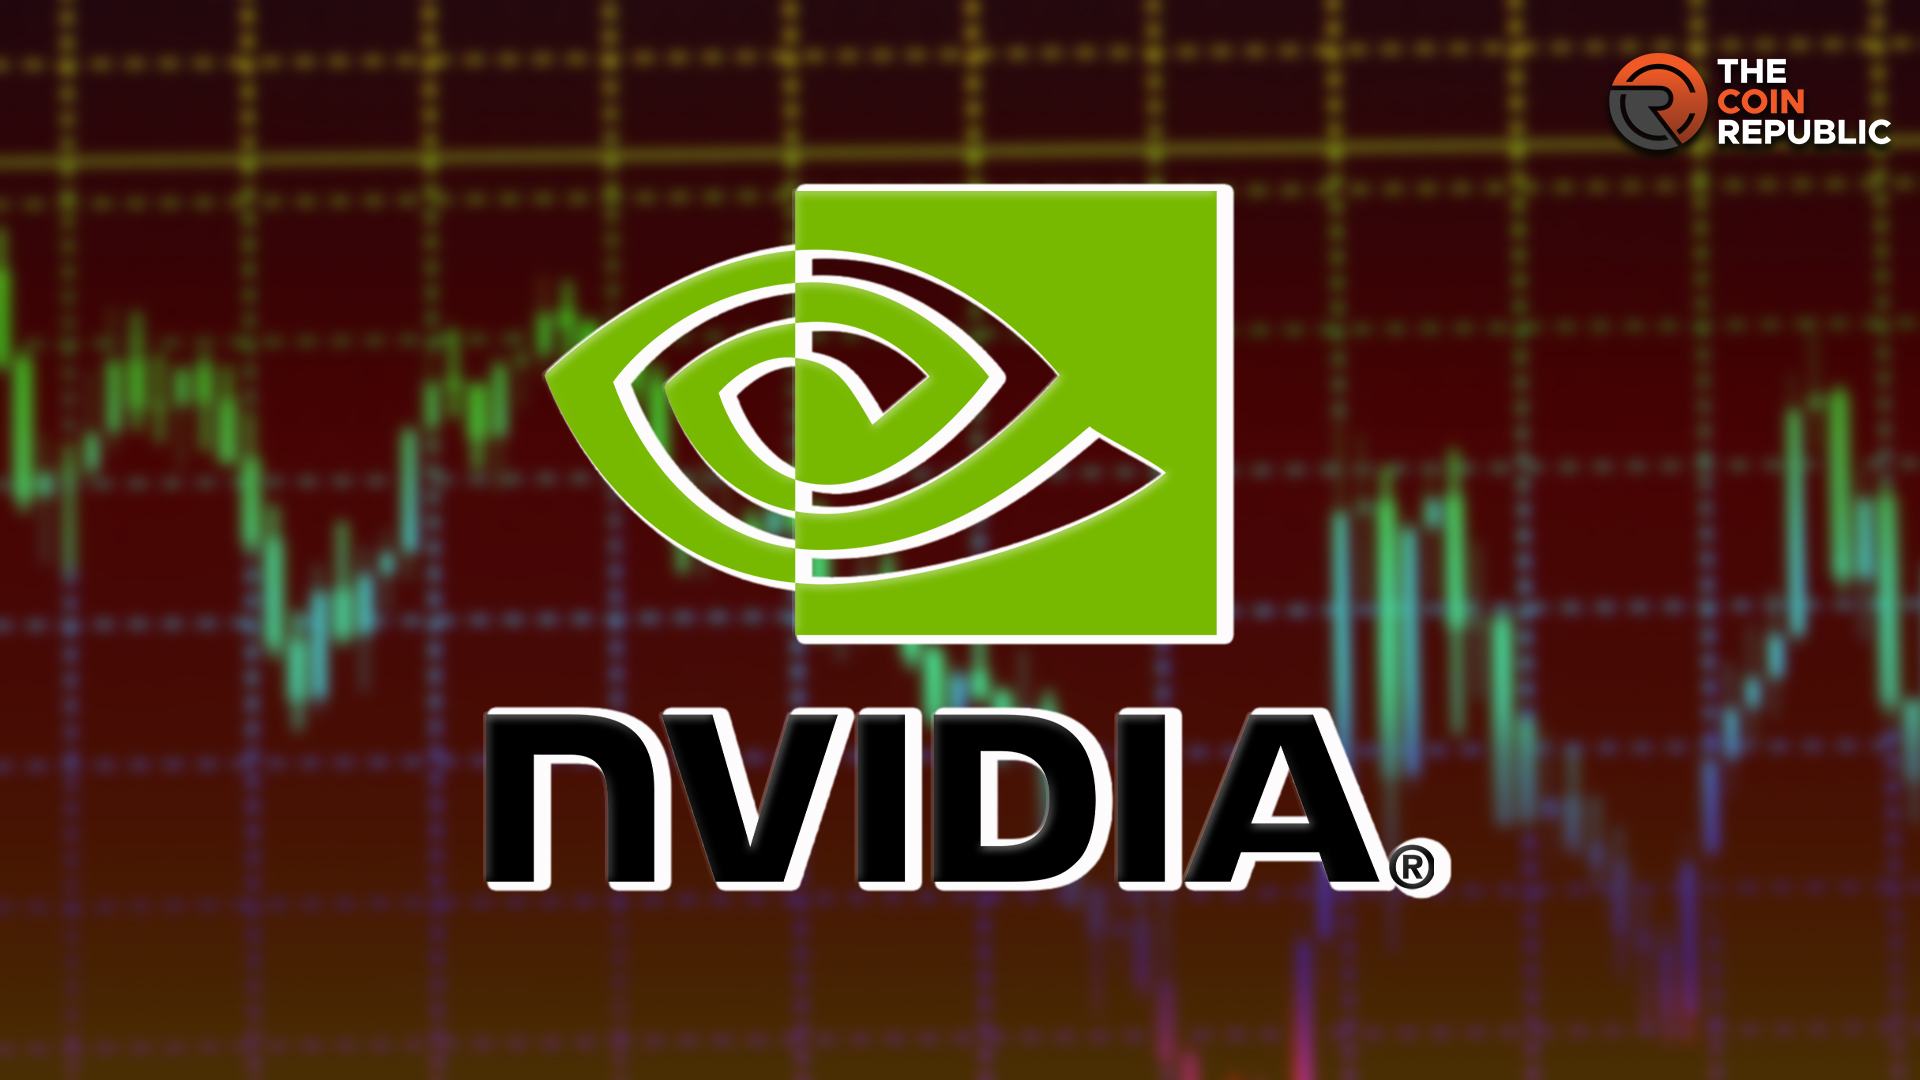 Can Nvidia (NVDA) Stock Cross $500 After August 23 Earnings?